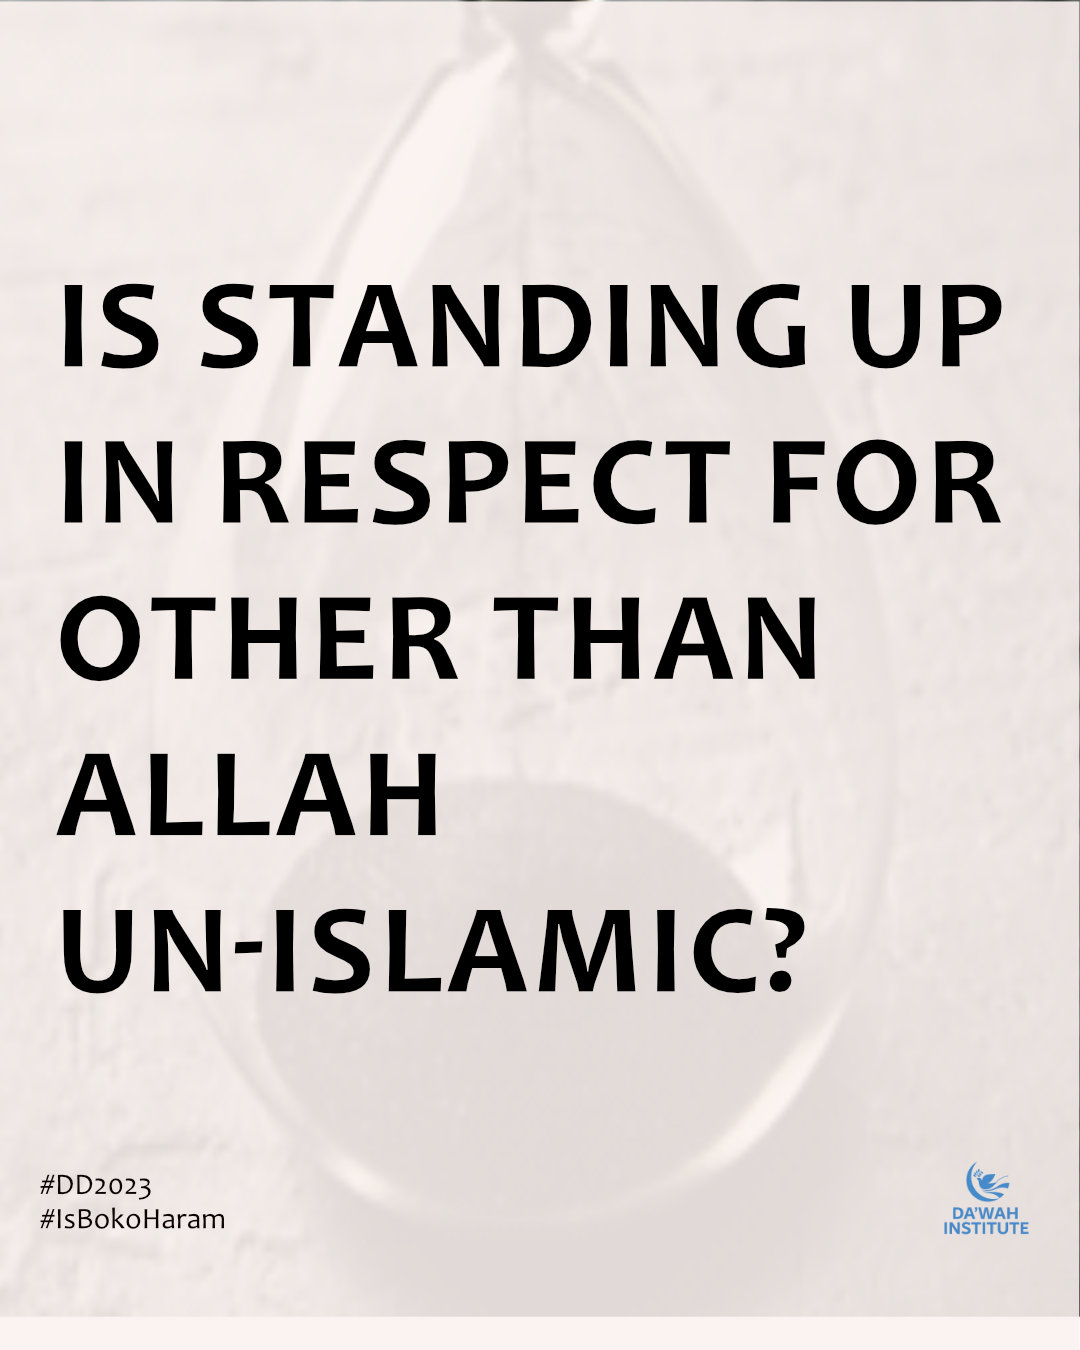 Is standing up in Respect for Other than Allah Un-Islamic?